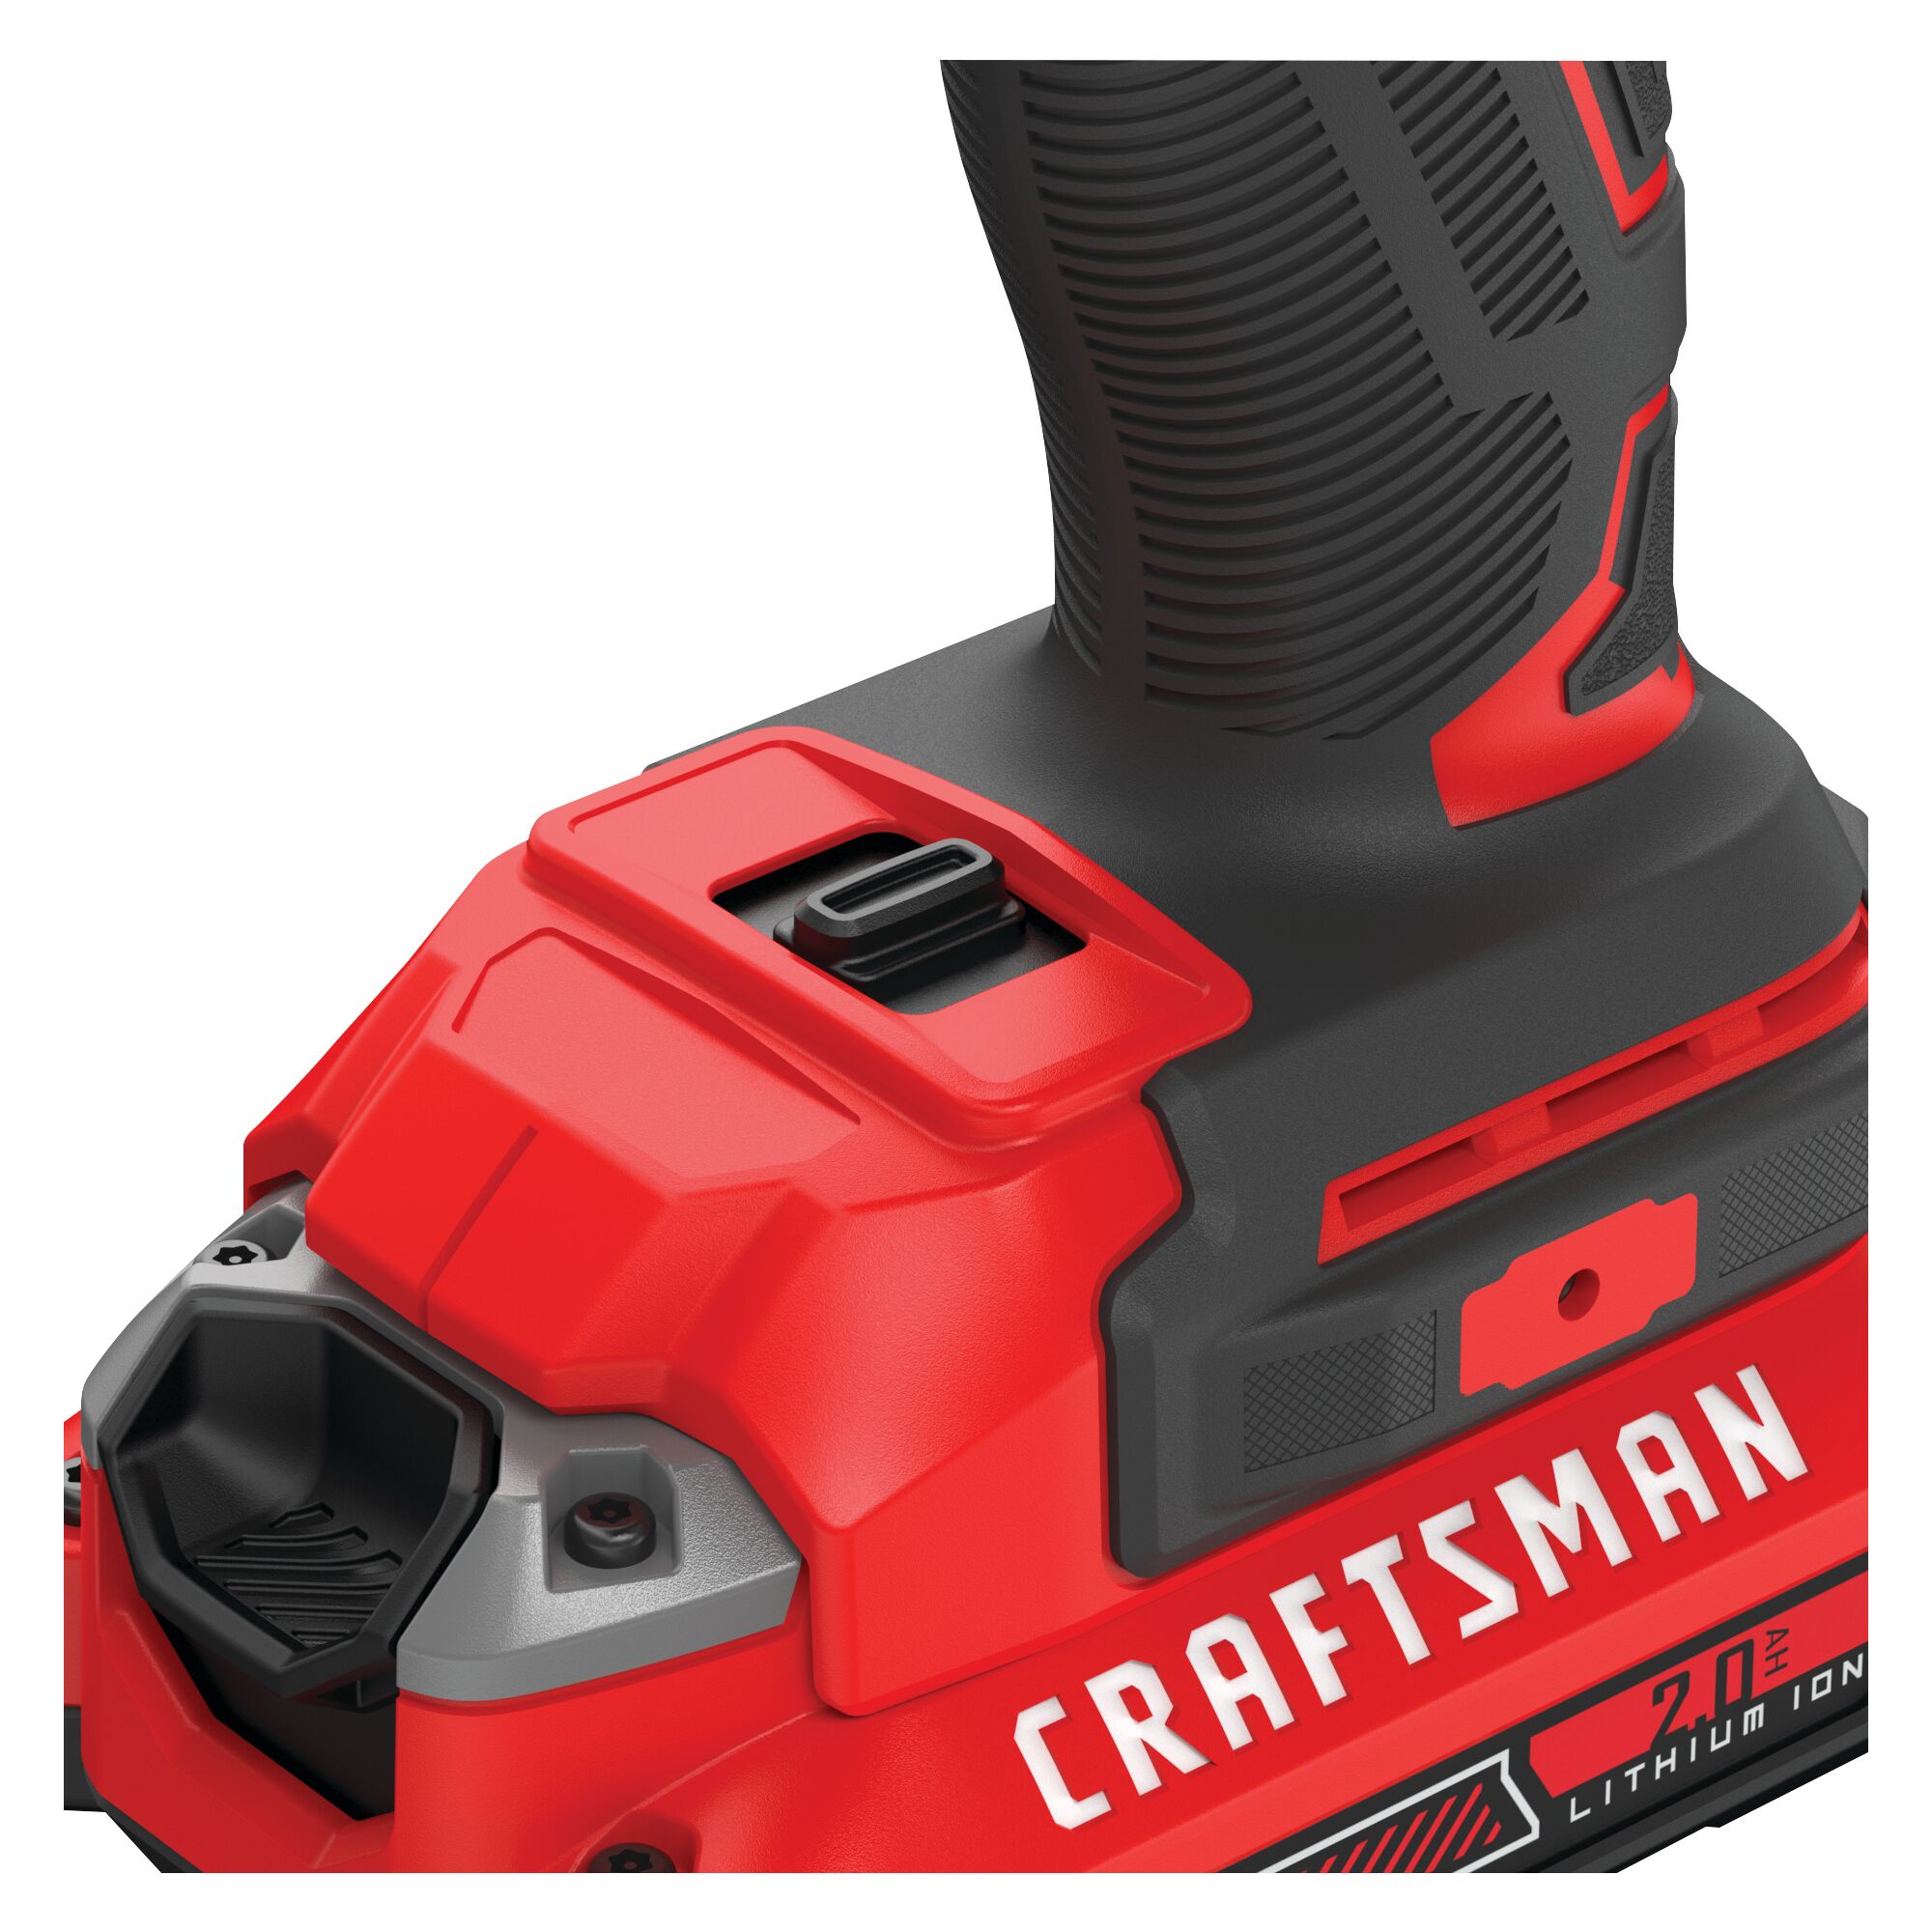 Replaceable battery feature of brushless cordless impact driver 2 batteries.